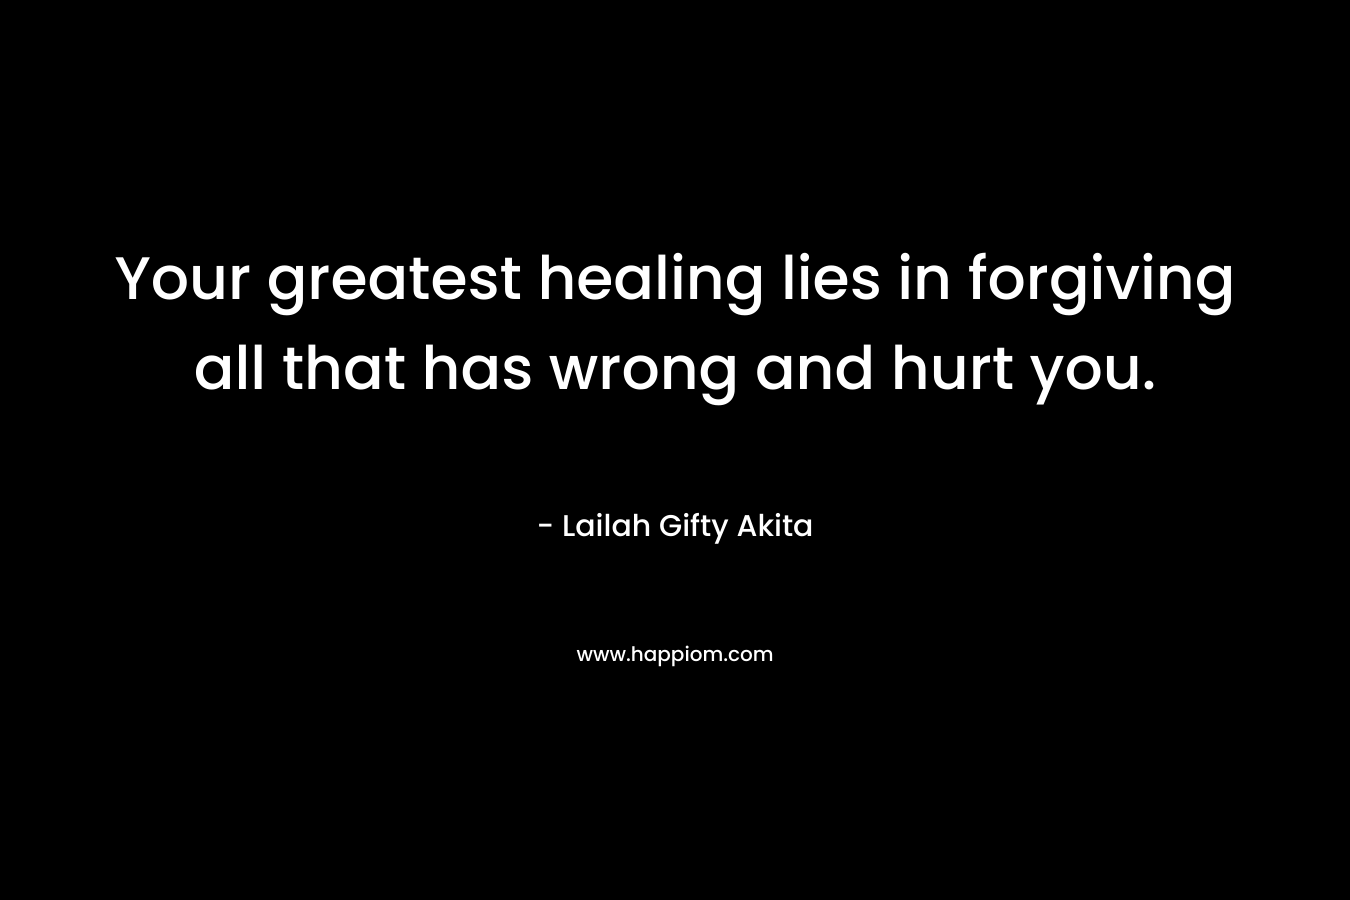 Your greatest healing lies in forgiving all that has wrong and hurt you.